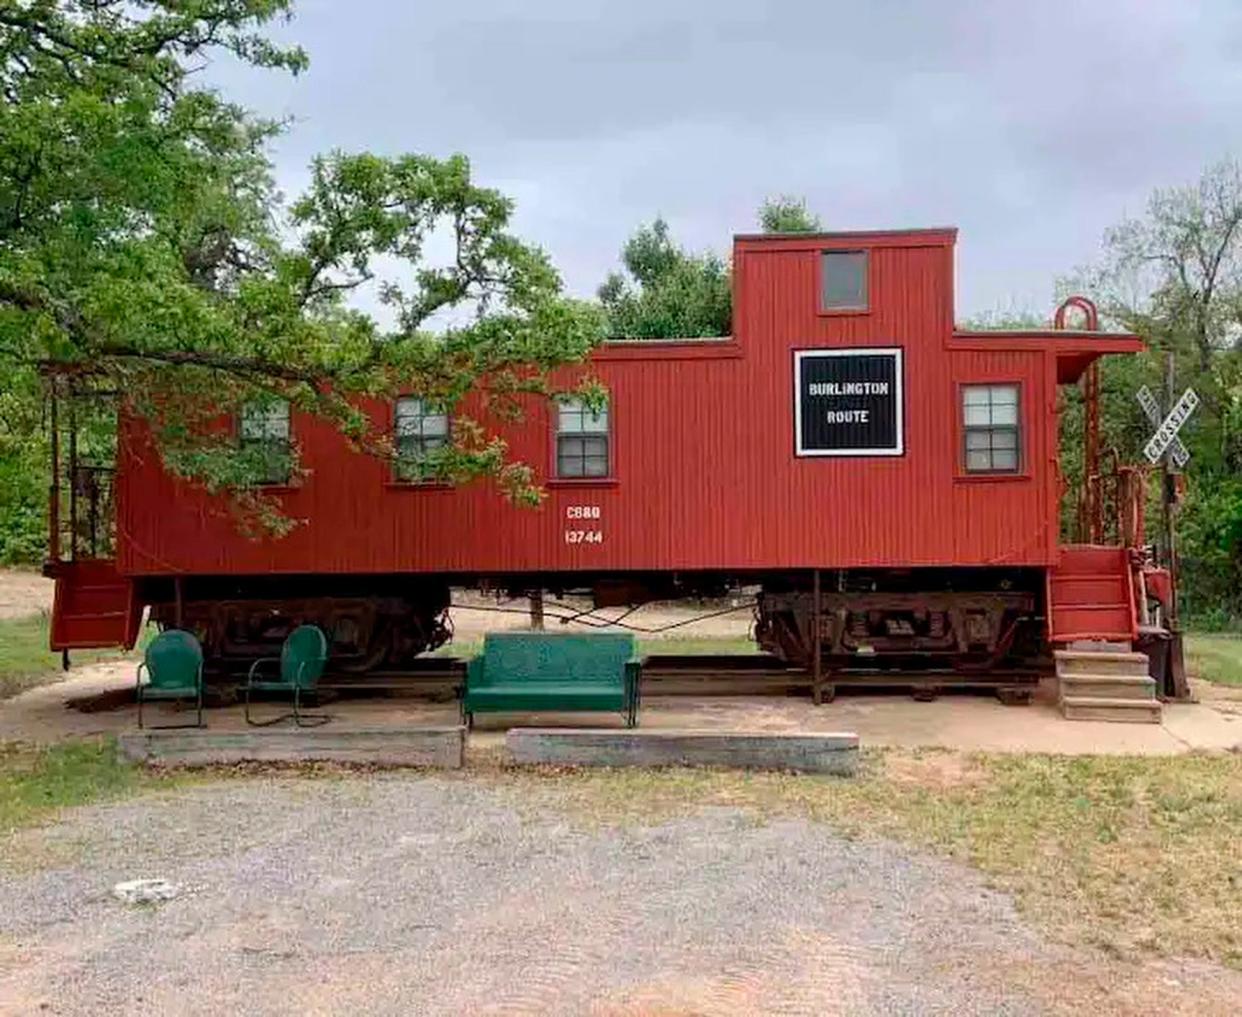 Route 66 Oklahoma City 1925 Red Caboose Airbnb. Photo Provided